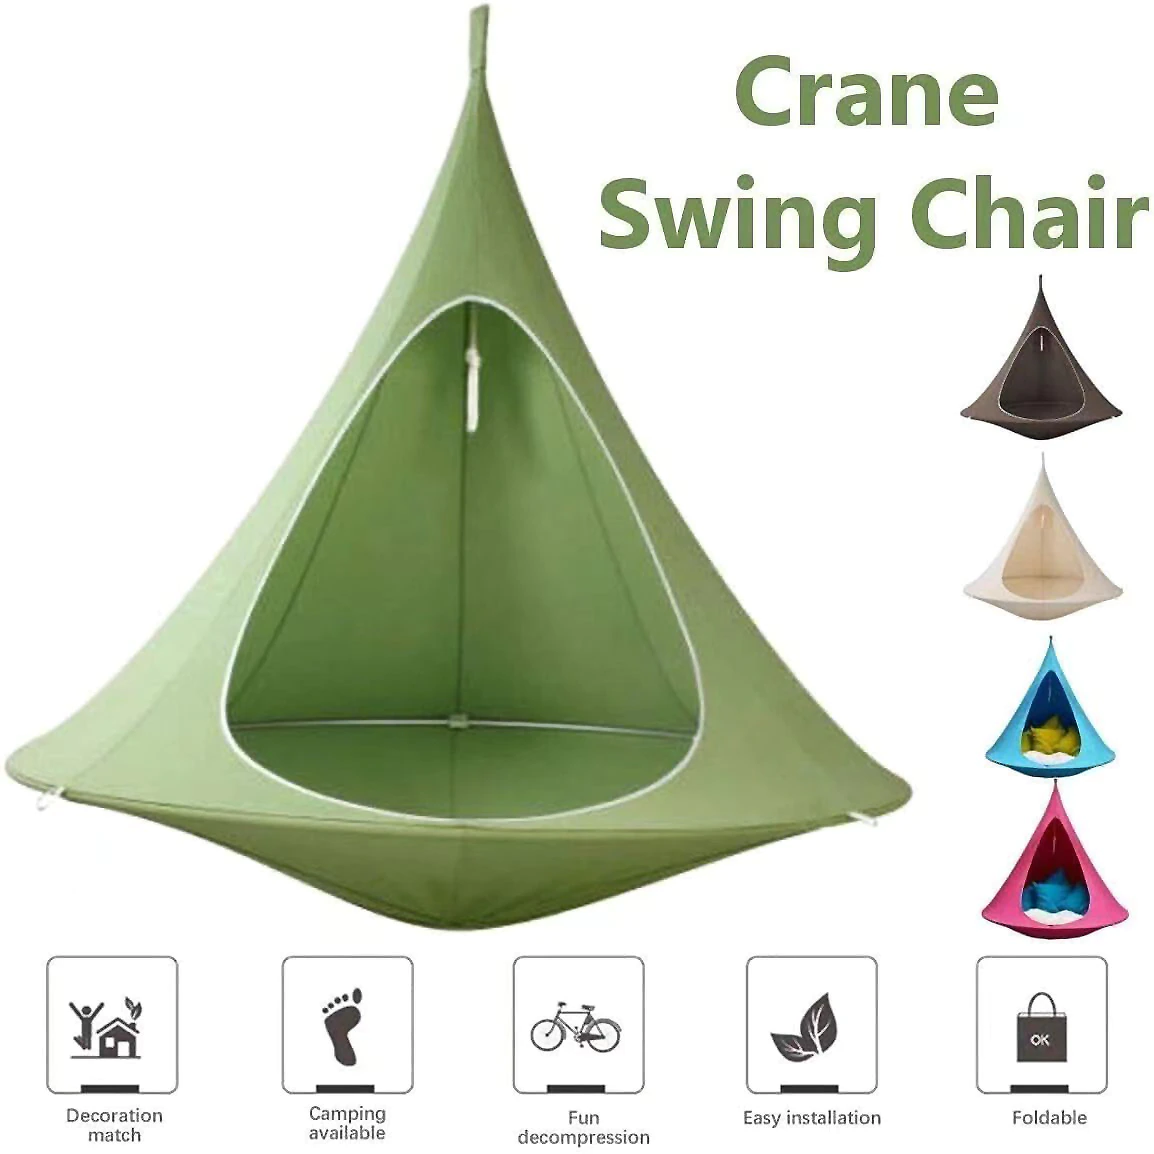 Cheap Goat Tents Waterproof Outdoor Garden Camping Hammock Large Size Swing Chair Foldable Children Family Room Tent Ceiling Hanging Sofa Bed   